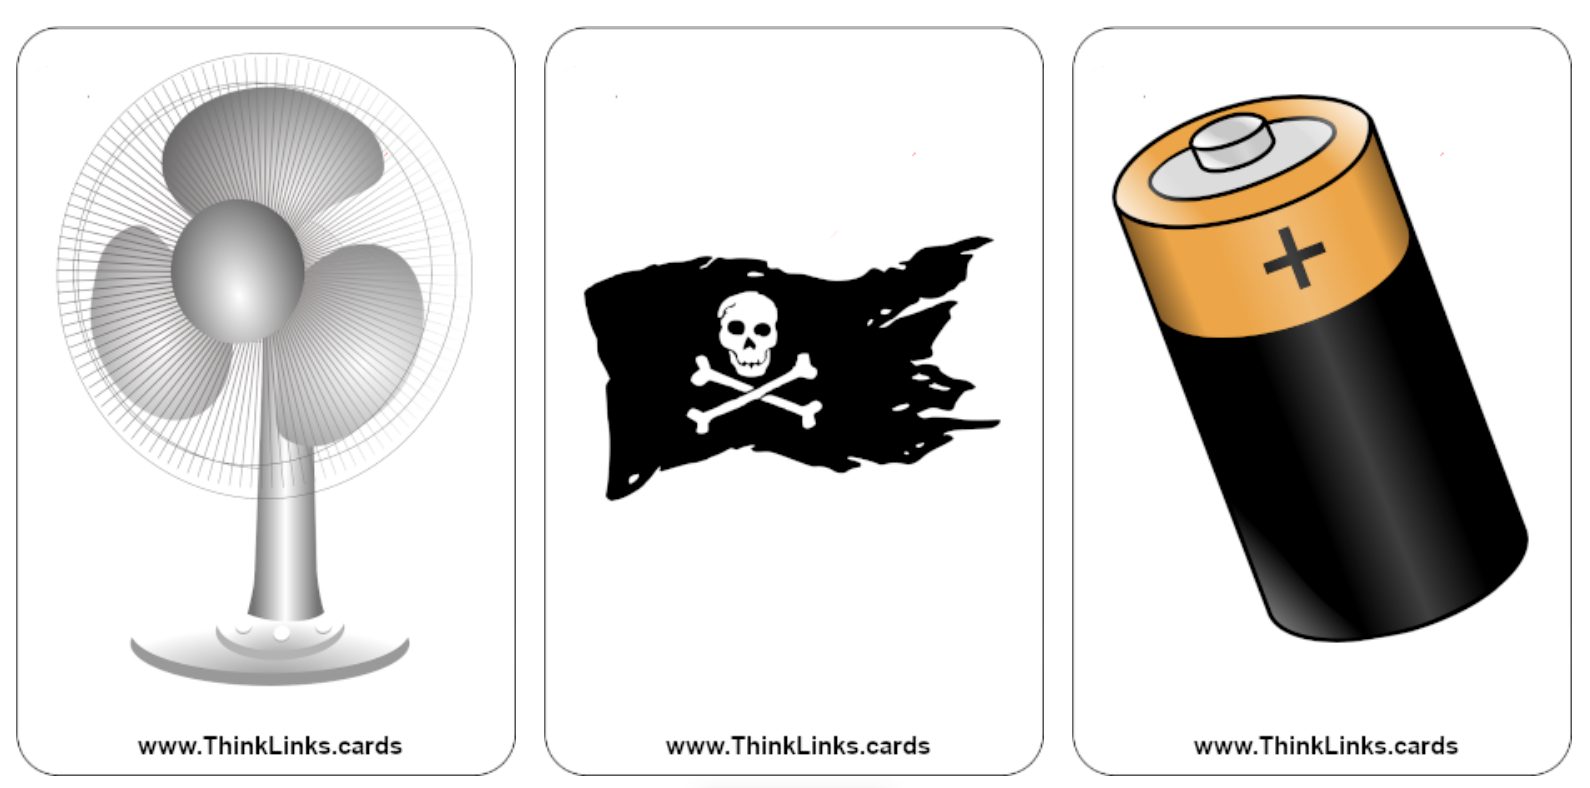 Think Links icebreaker game cards of a fan, pirate flag, battery